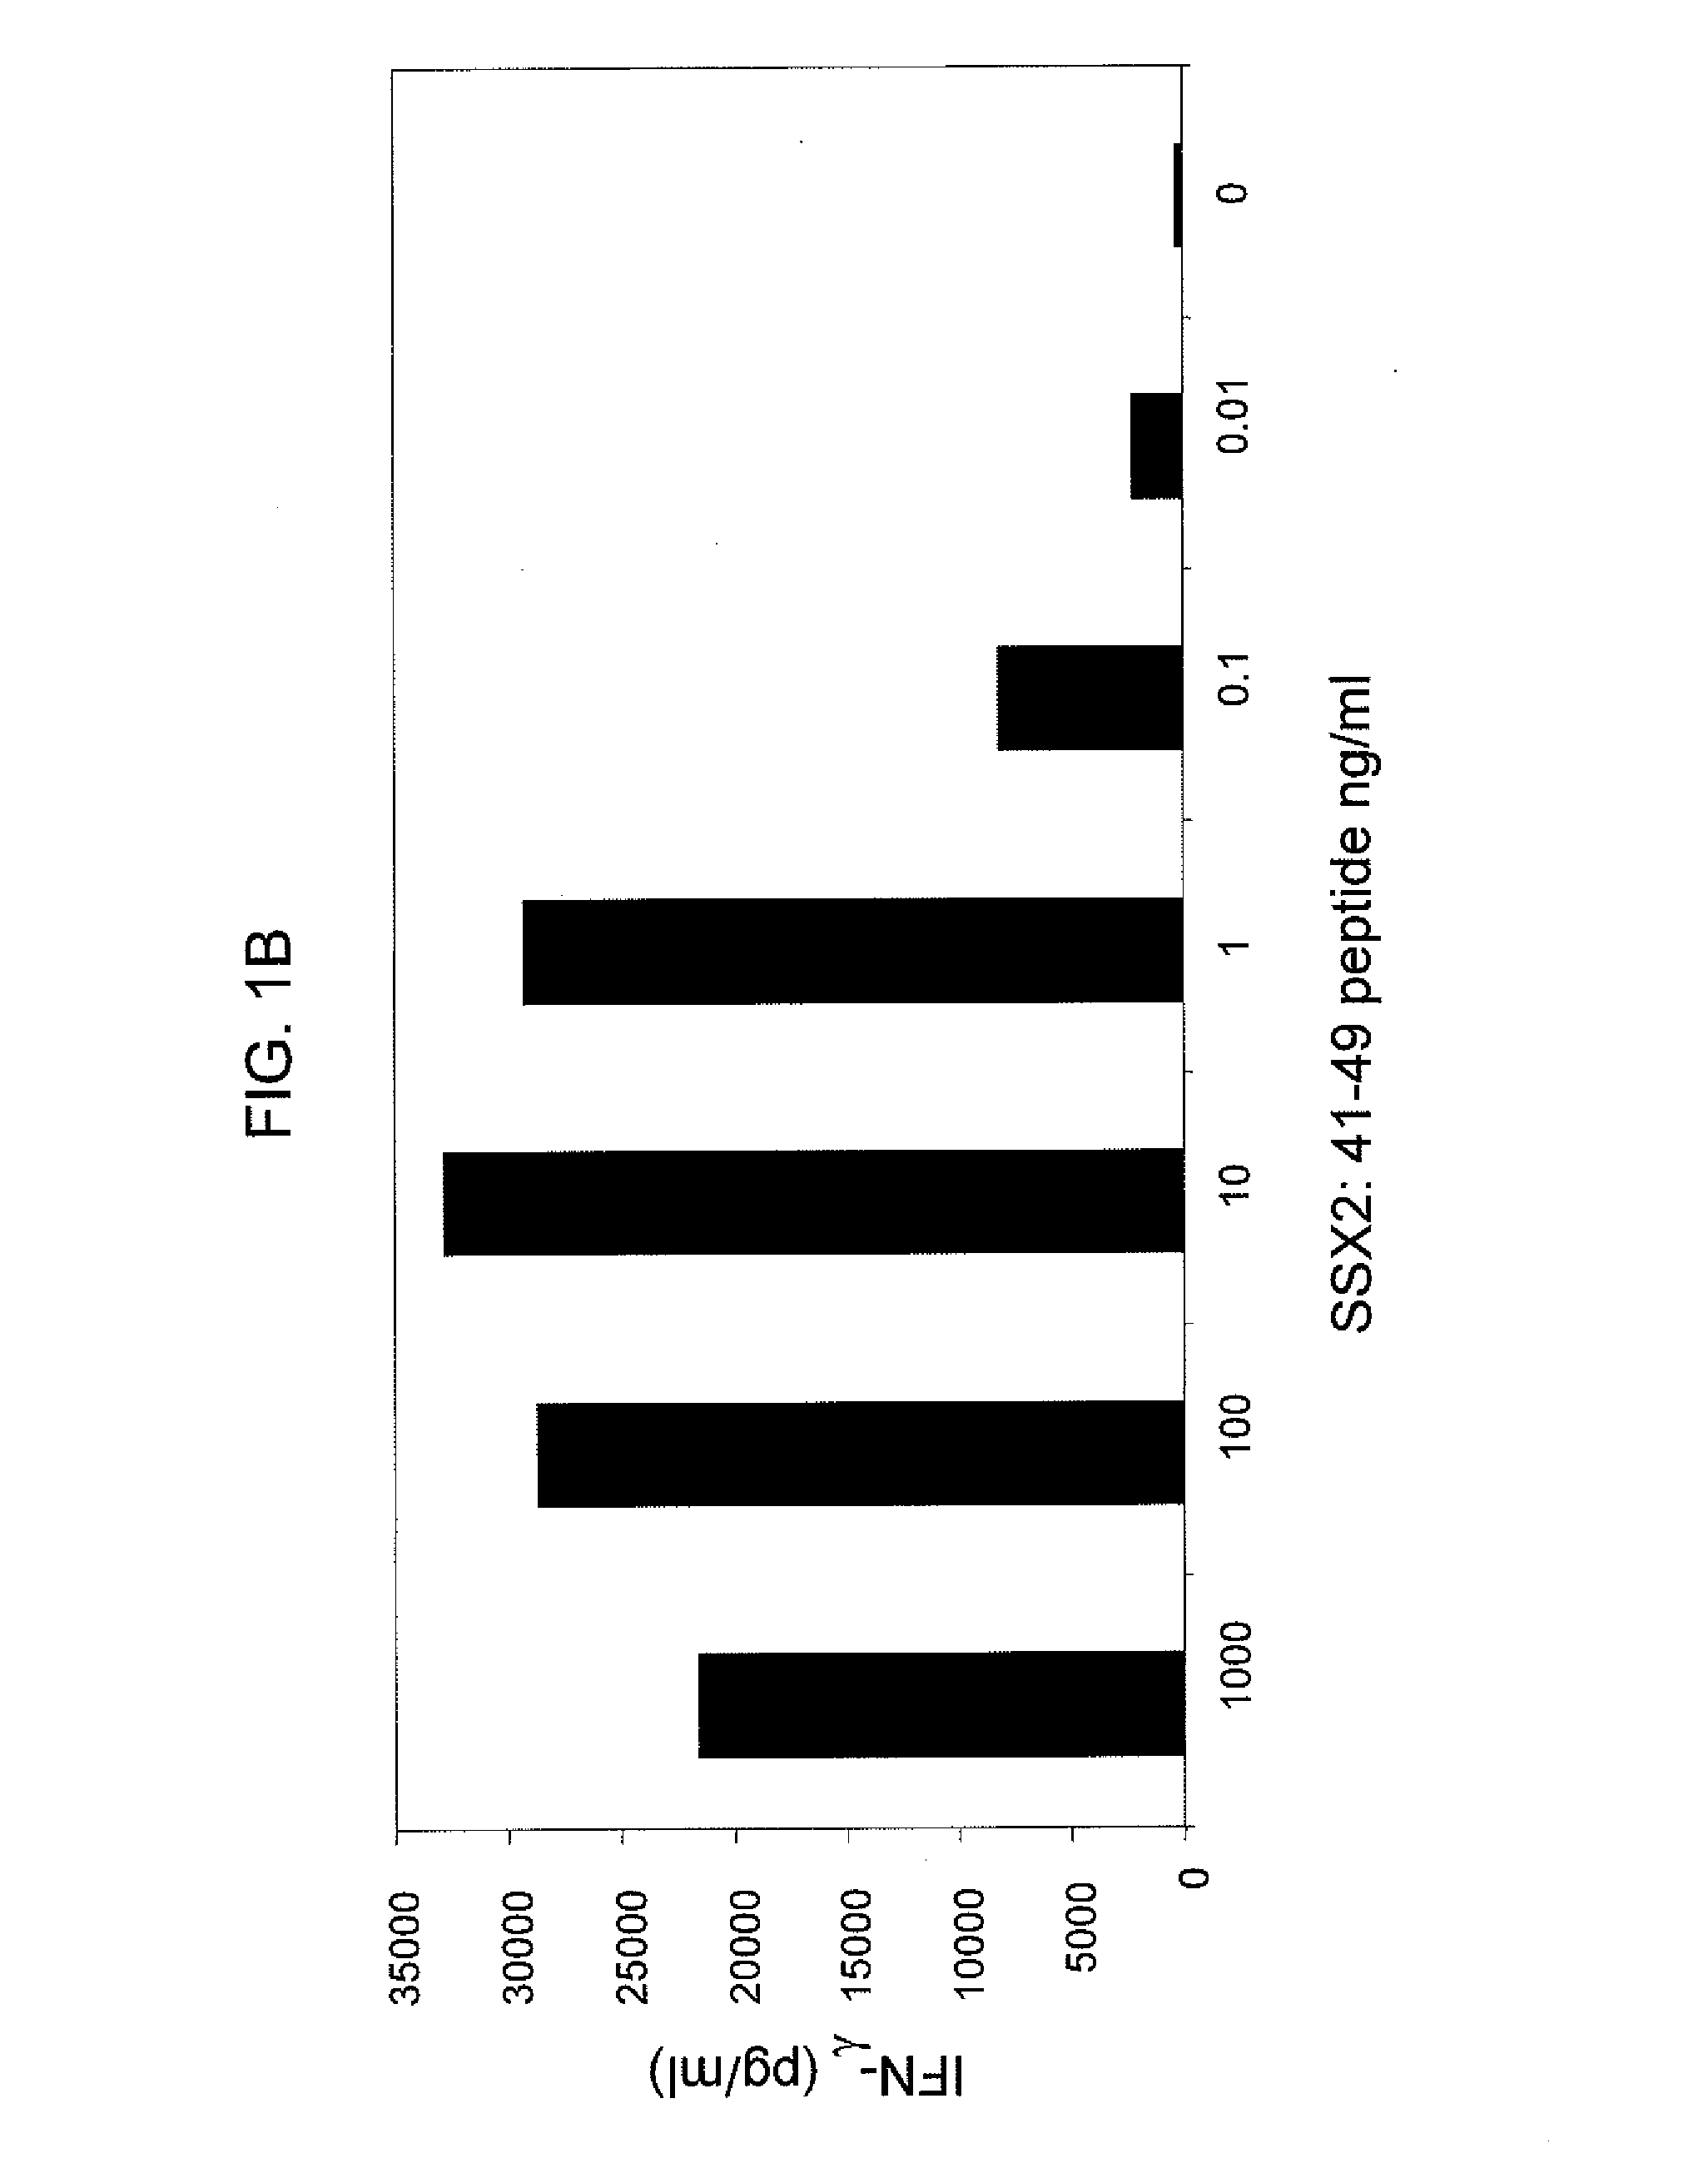 Anti-ssx-2 t cell receptors and related materials and methods of use